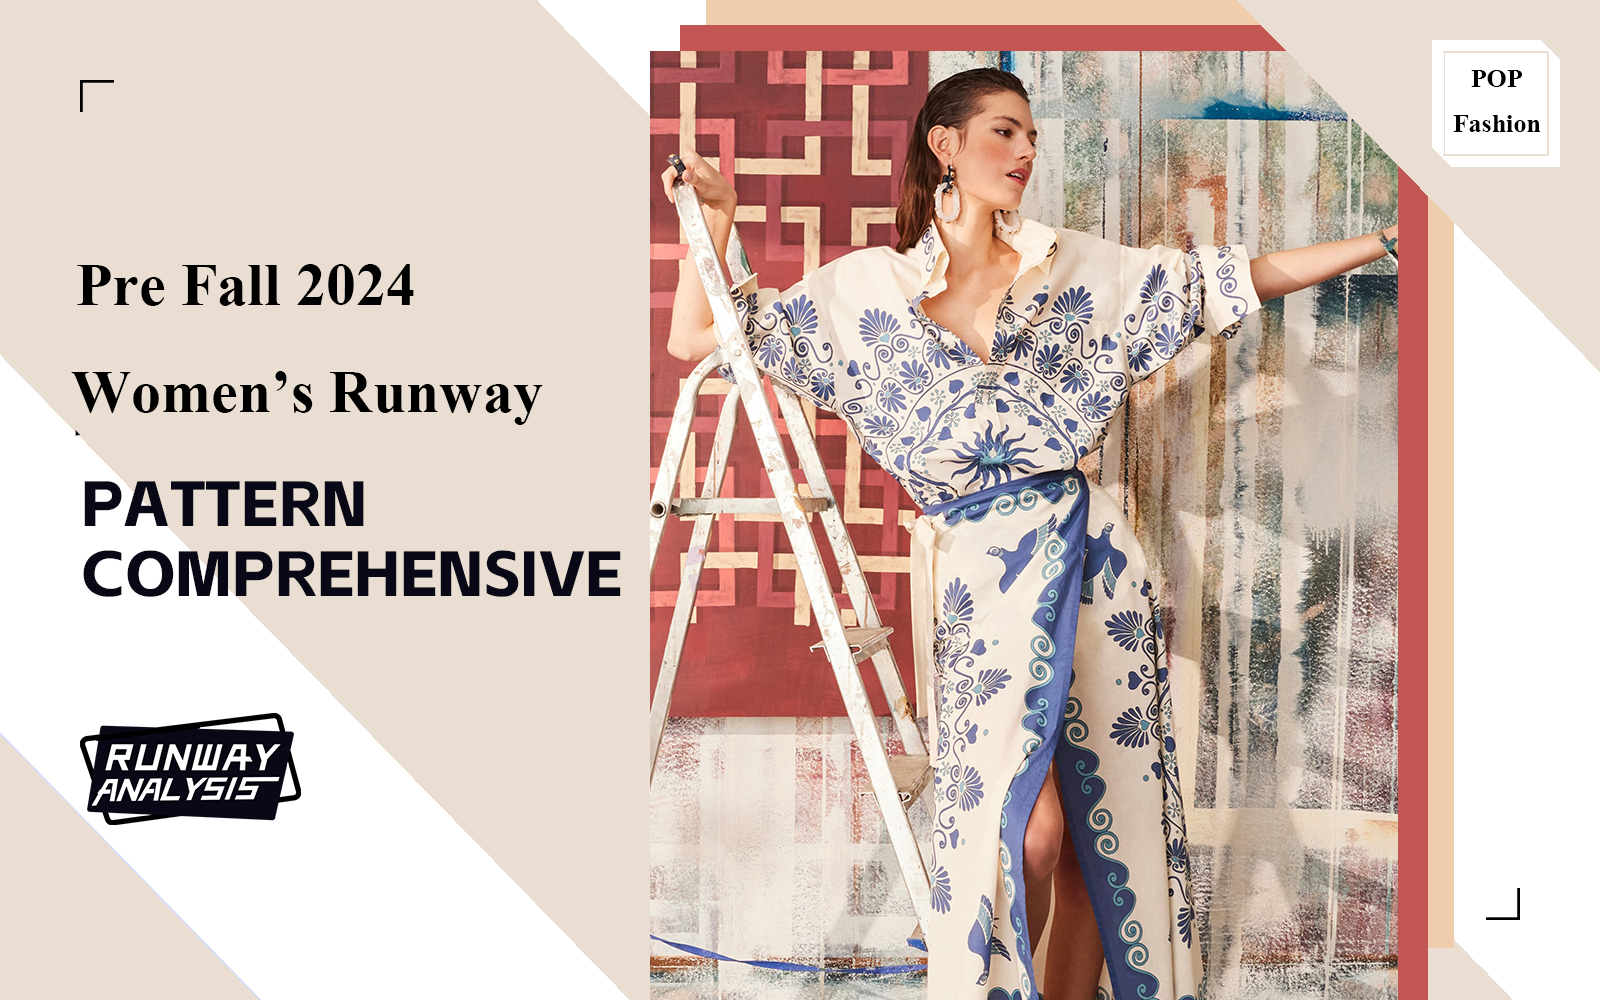 Flower Holiday -- The Comprehensive Analysis of Womenswear Runway